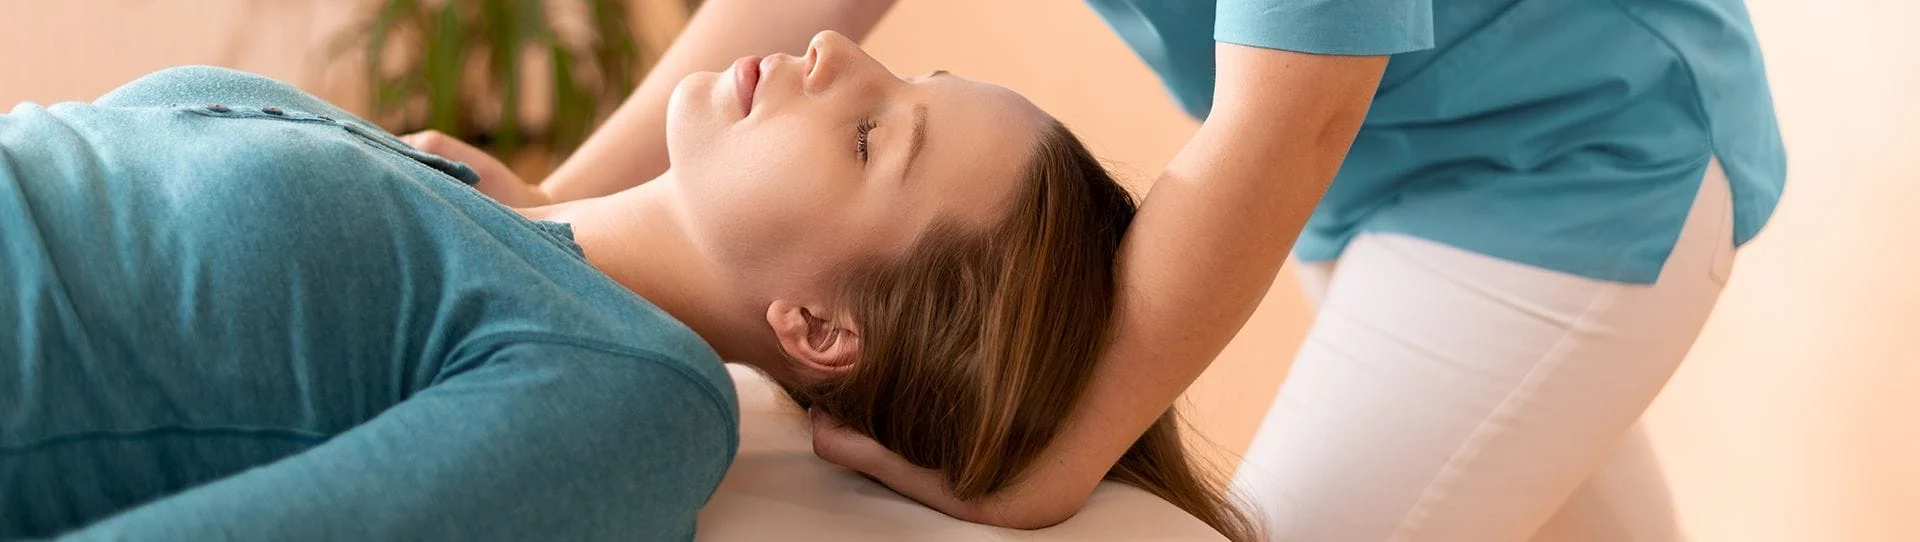 women getting spinal adjustment